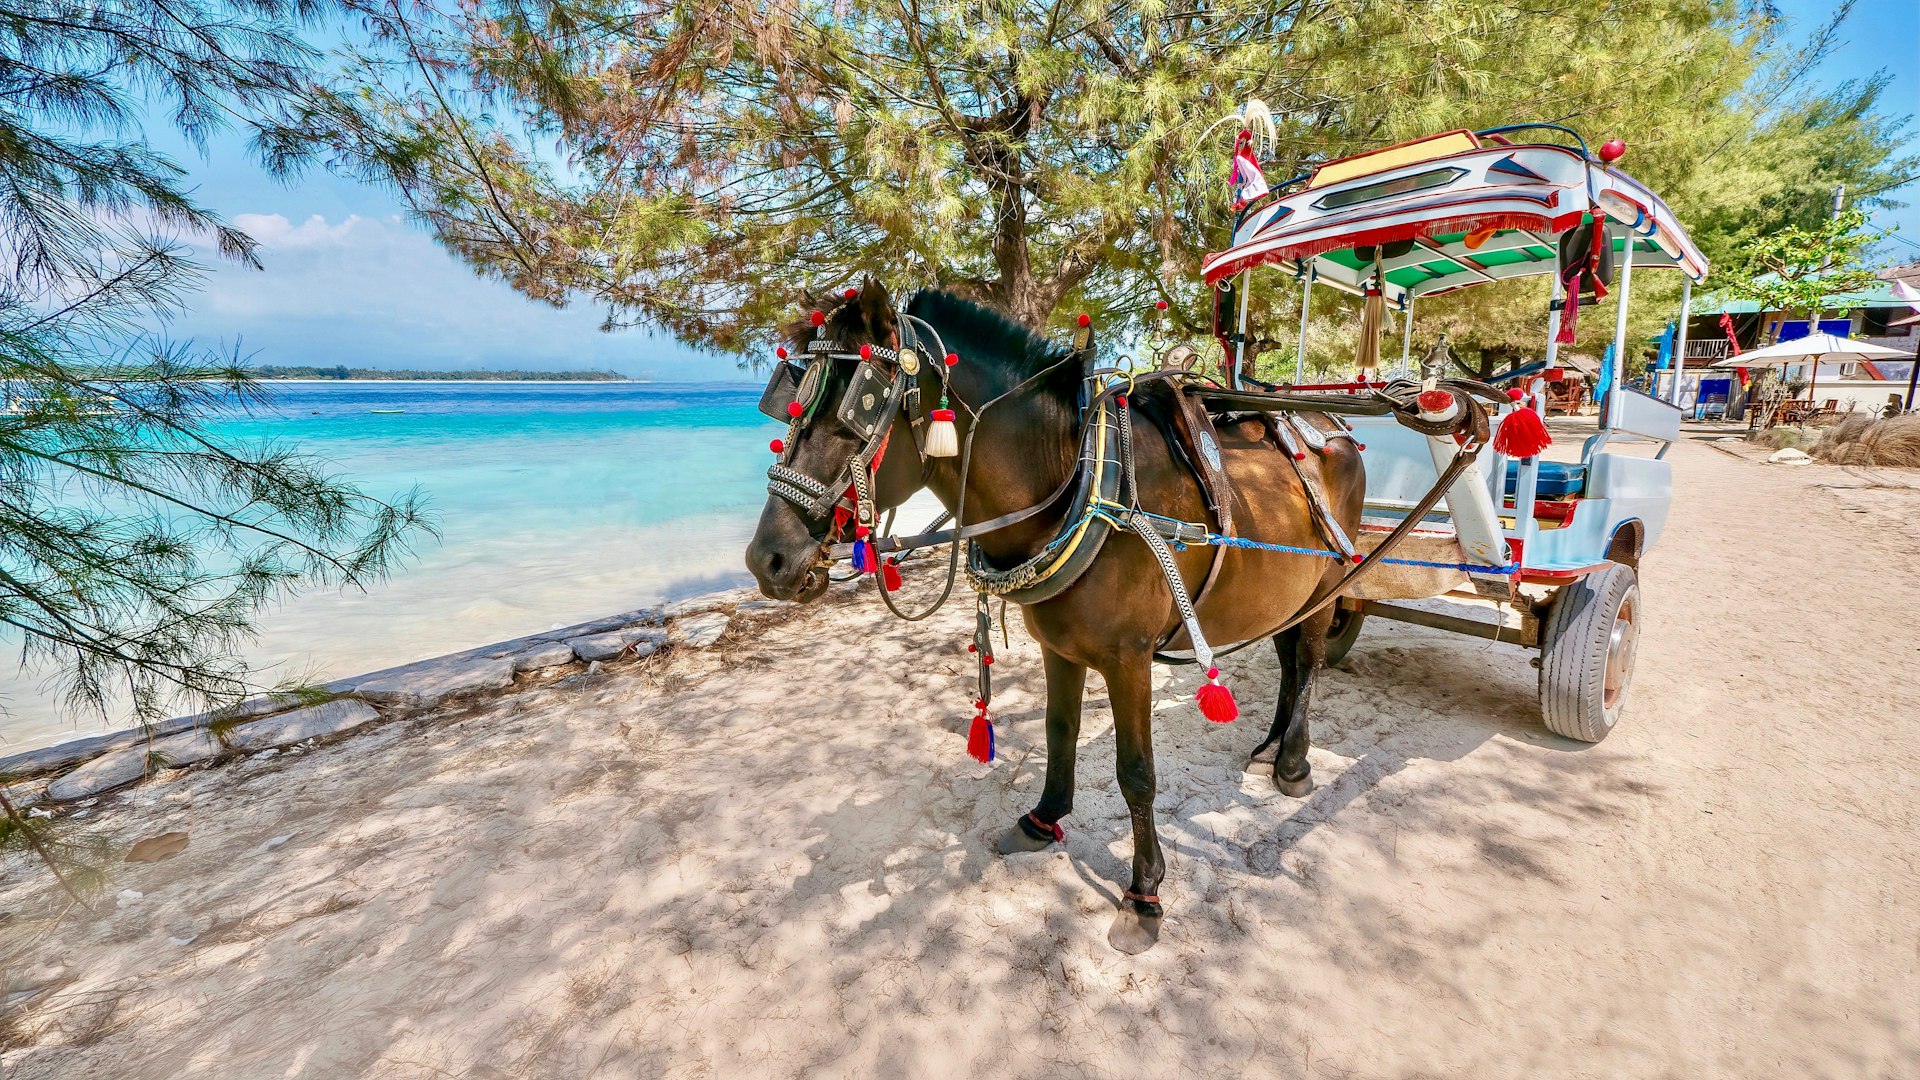 A decorated horse and buggy known as a cidomo on the Gili Islands